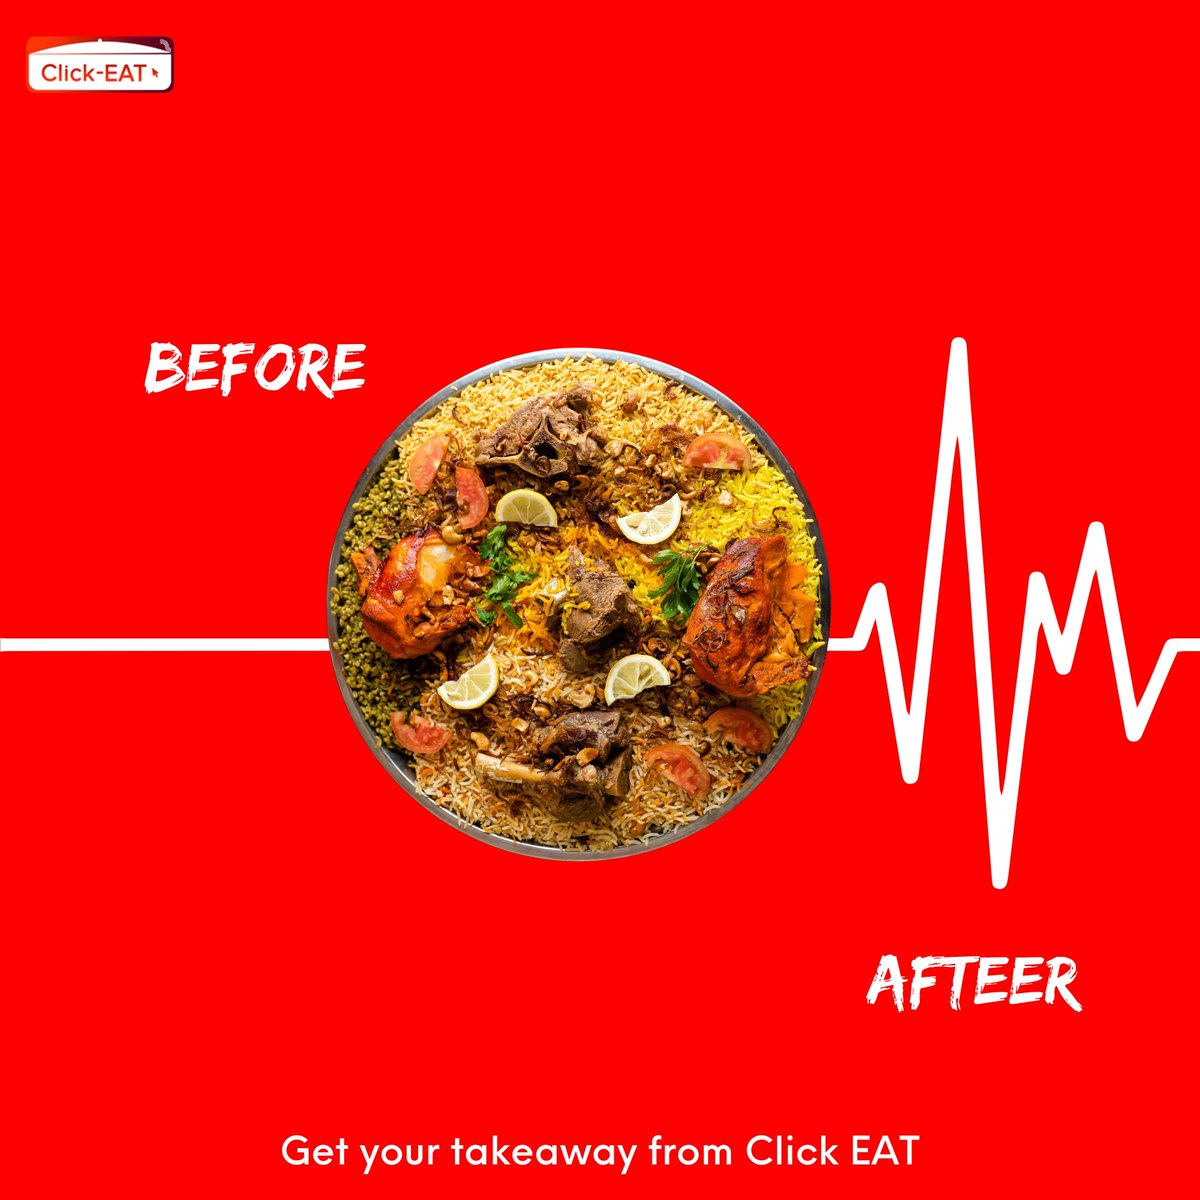 Before biryani: low energy.

After biryani: supercharged!

Get that biryani boost every time with Click Eat.
#bookyourdine #dinewithclickeat #takeaway #Foodies